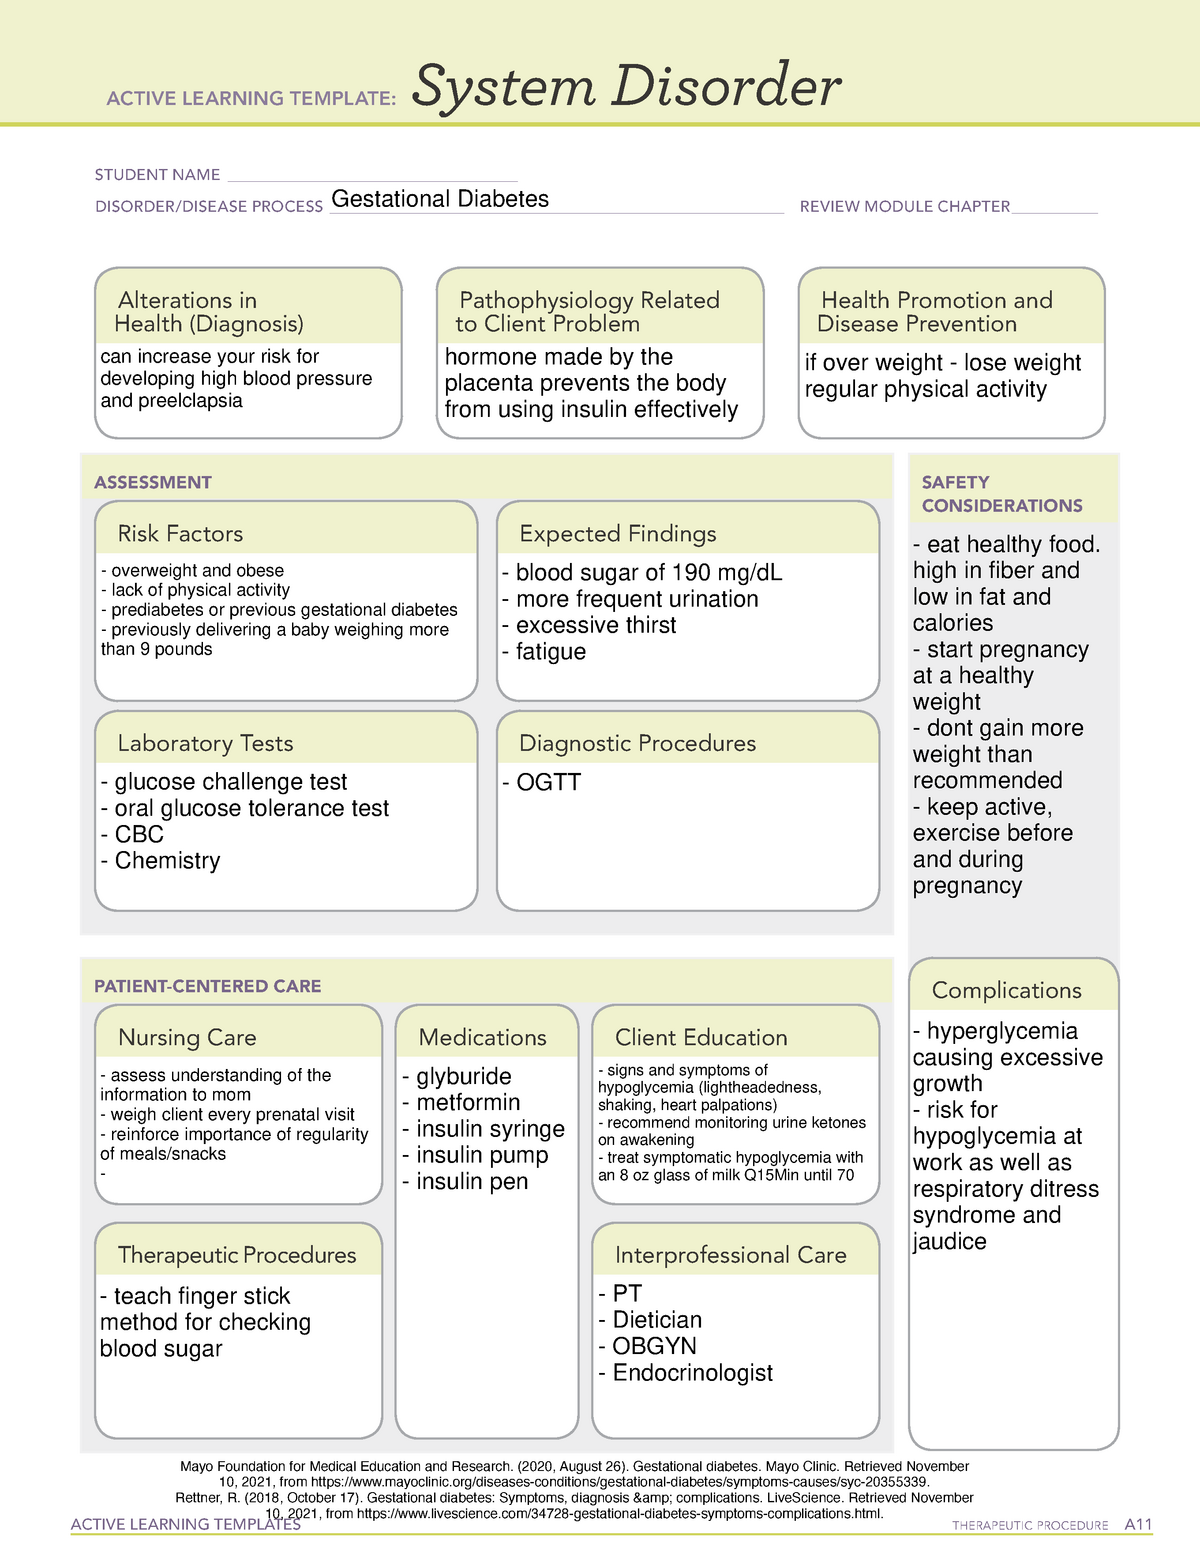 System disorder gestational template - ACTIVE LEARNING TEMPLATES ...